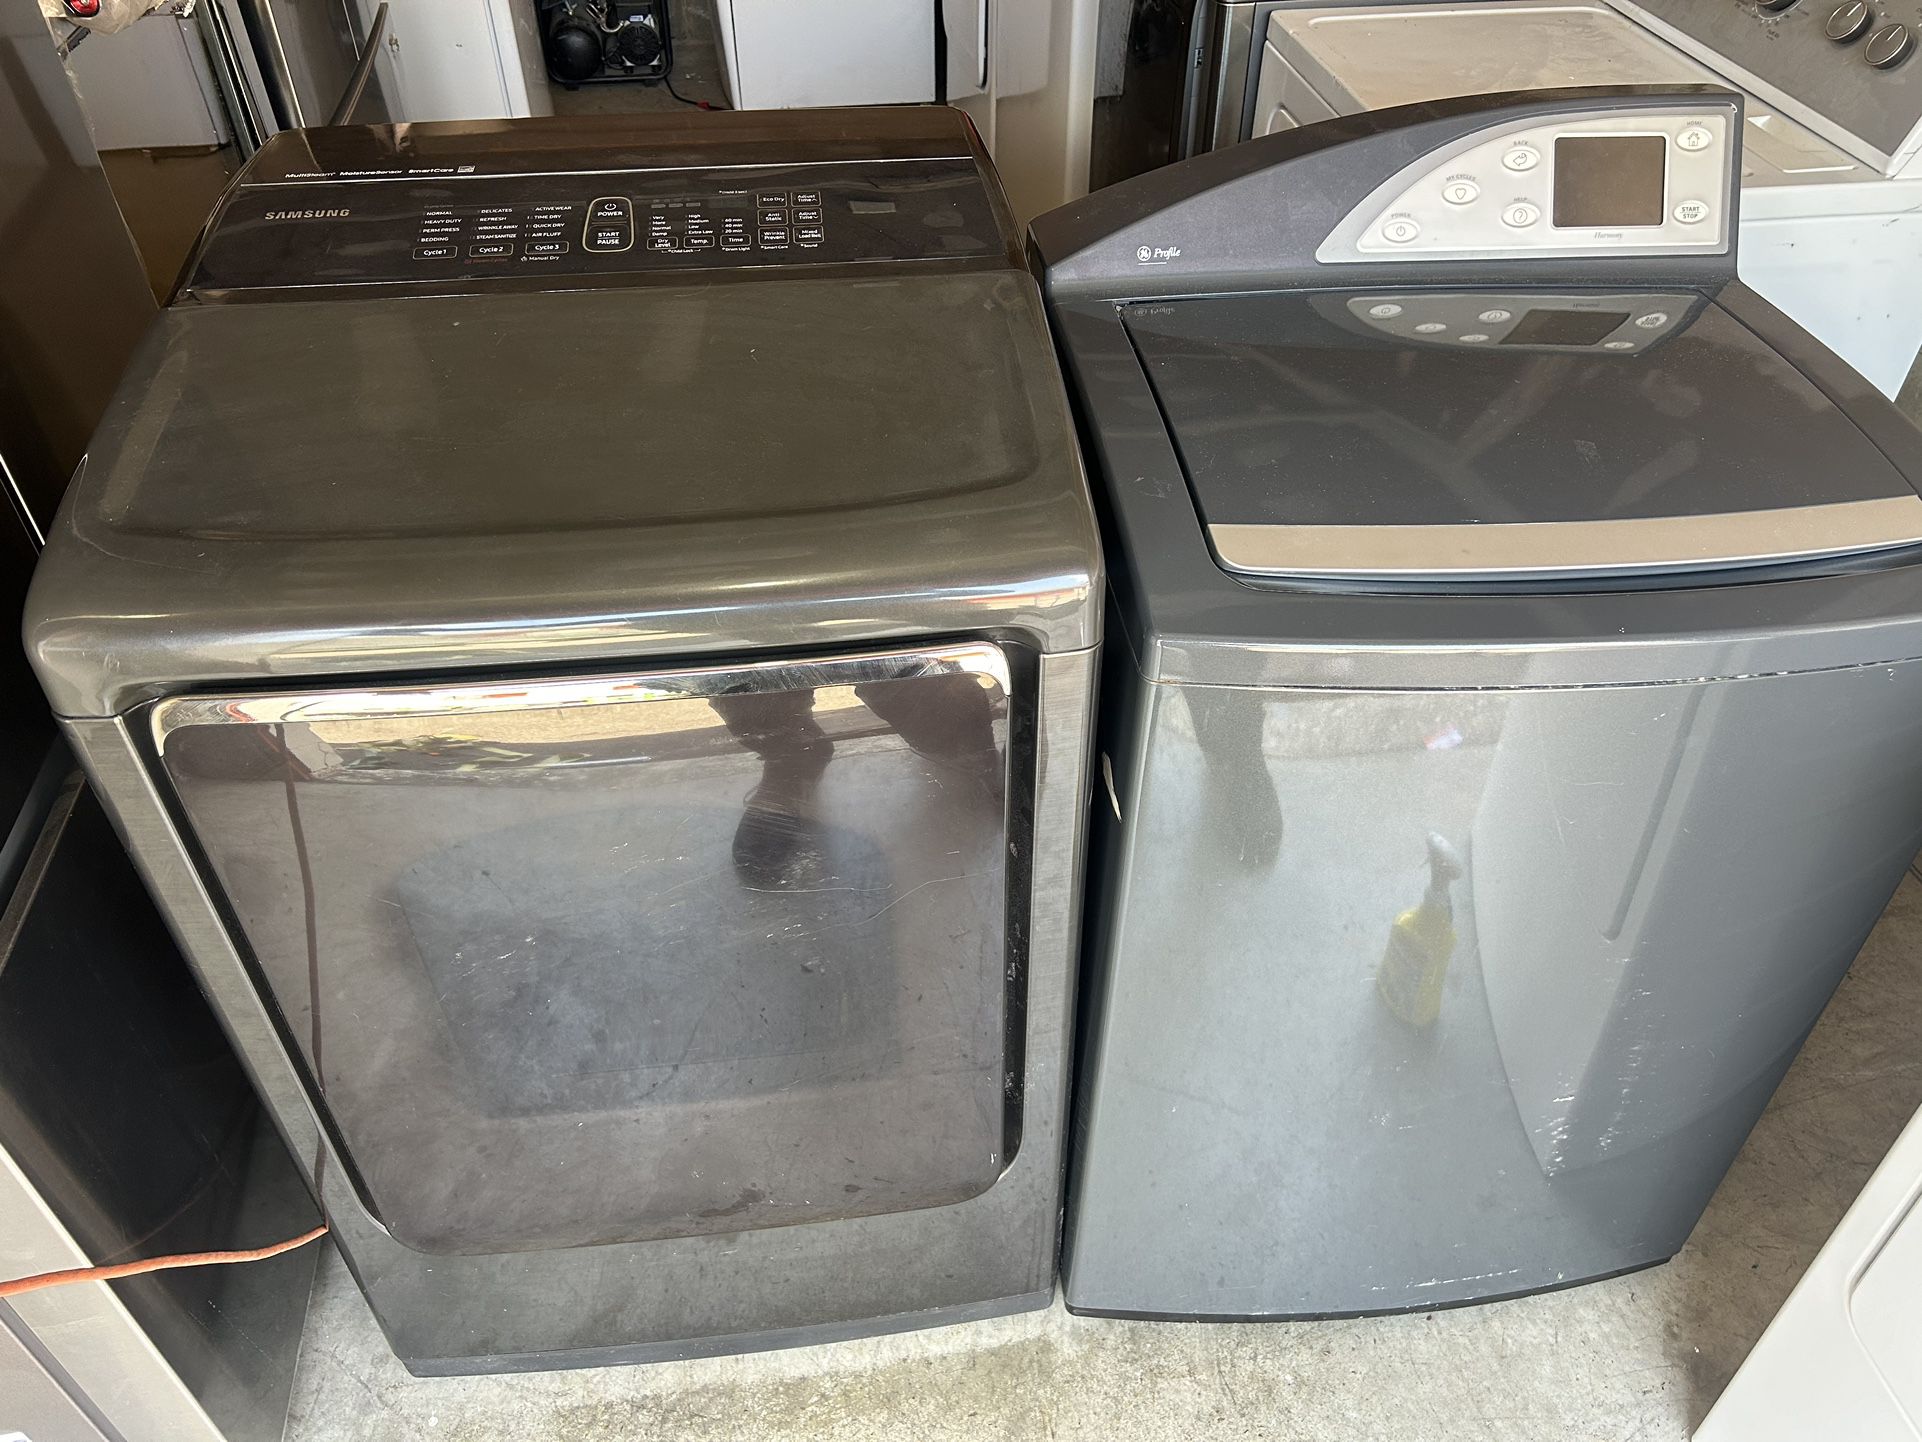 ⭐️NICE CLEAN TOP LOAD WASHER AND DRYER SET⭐️